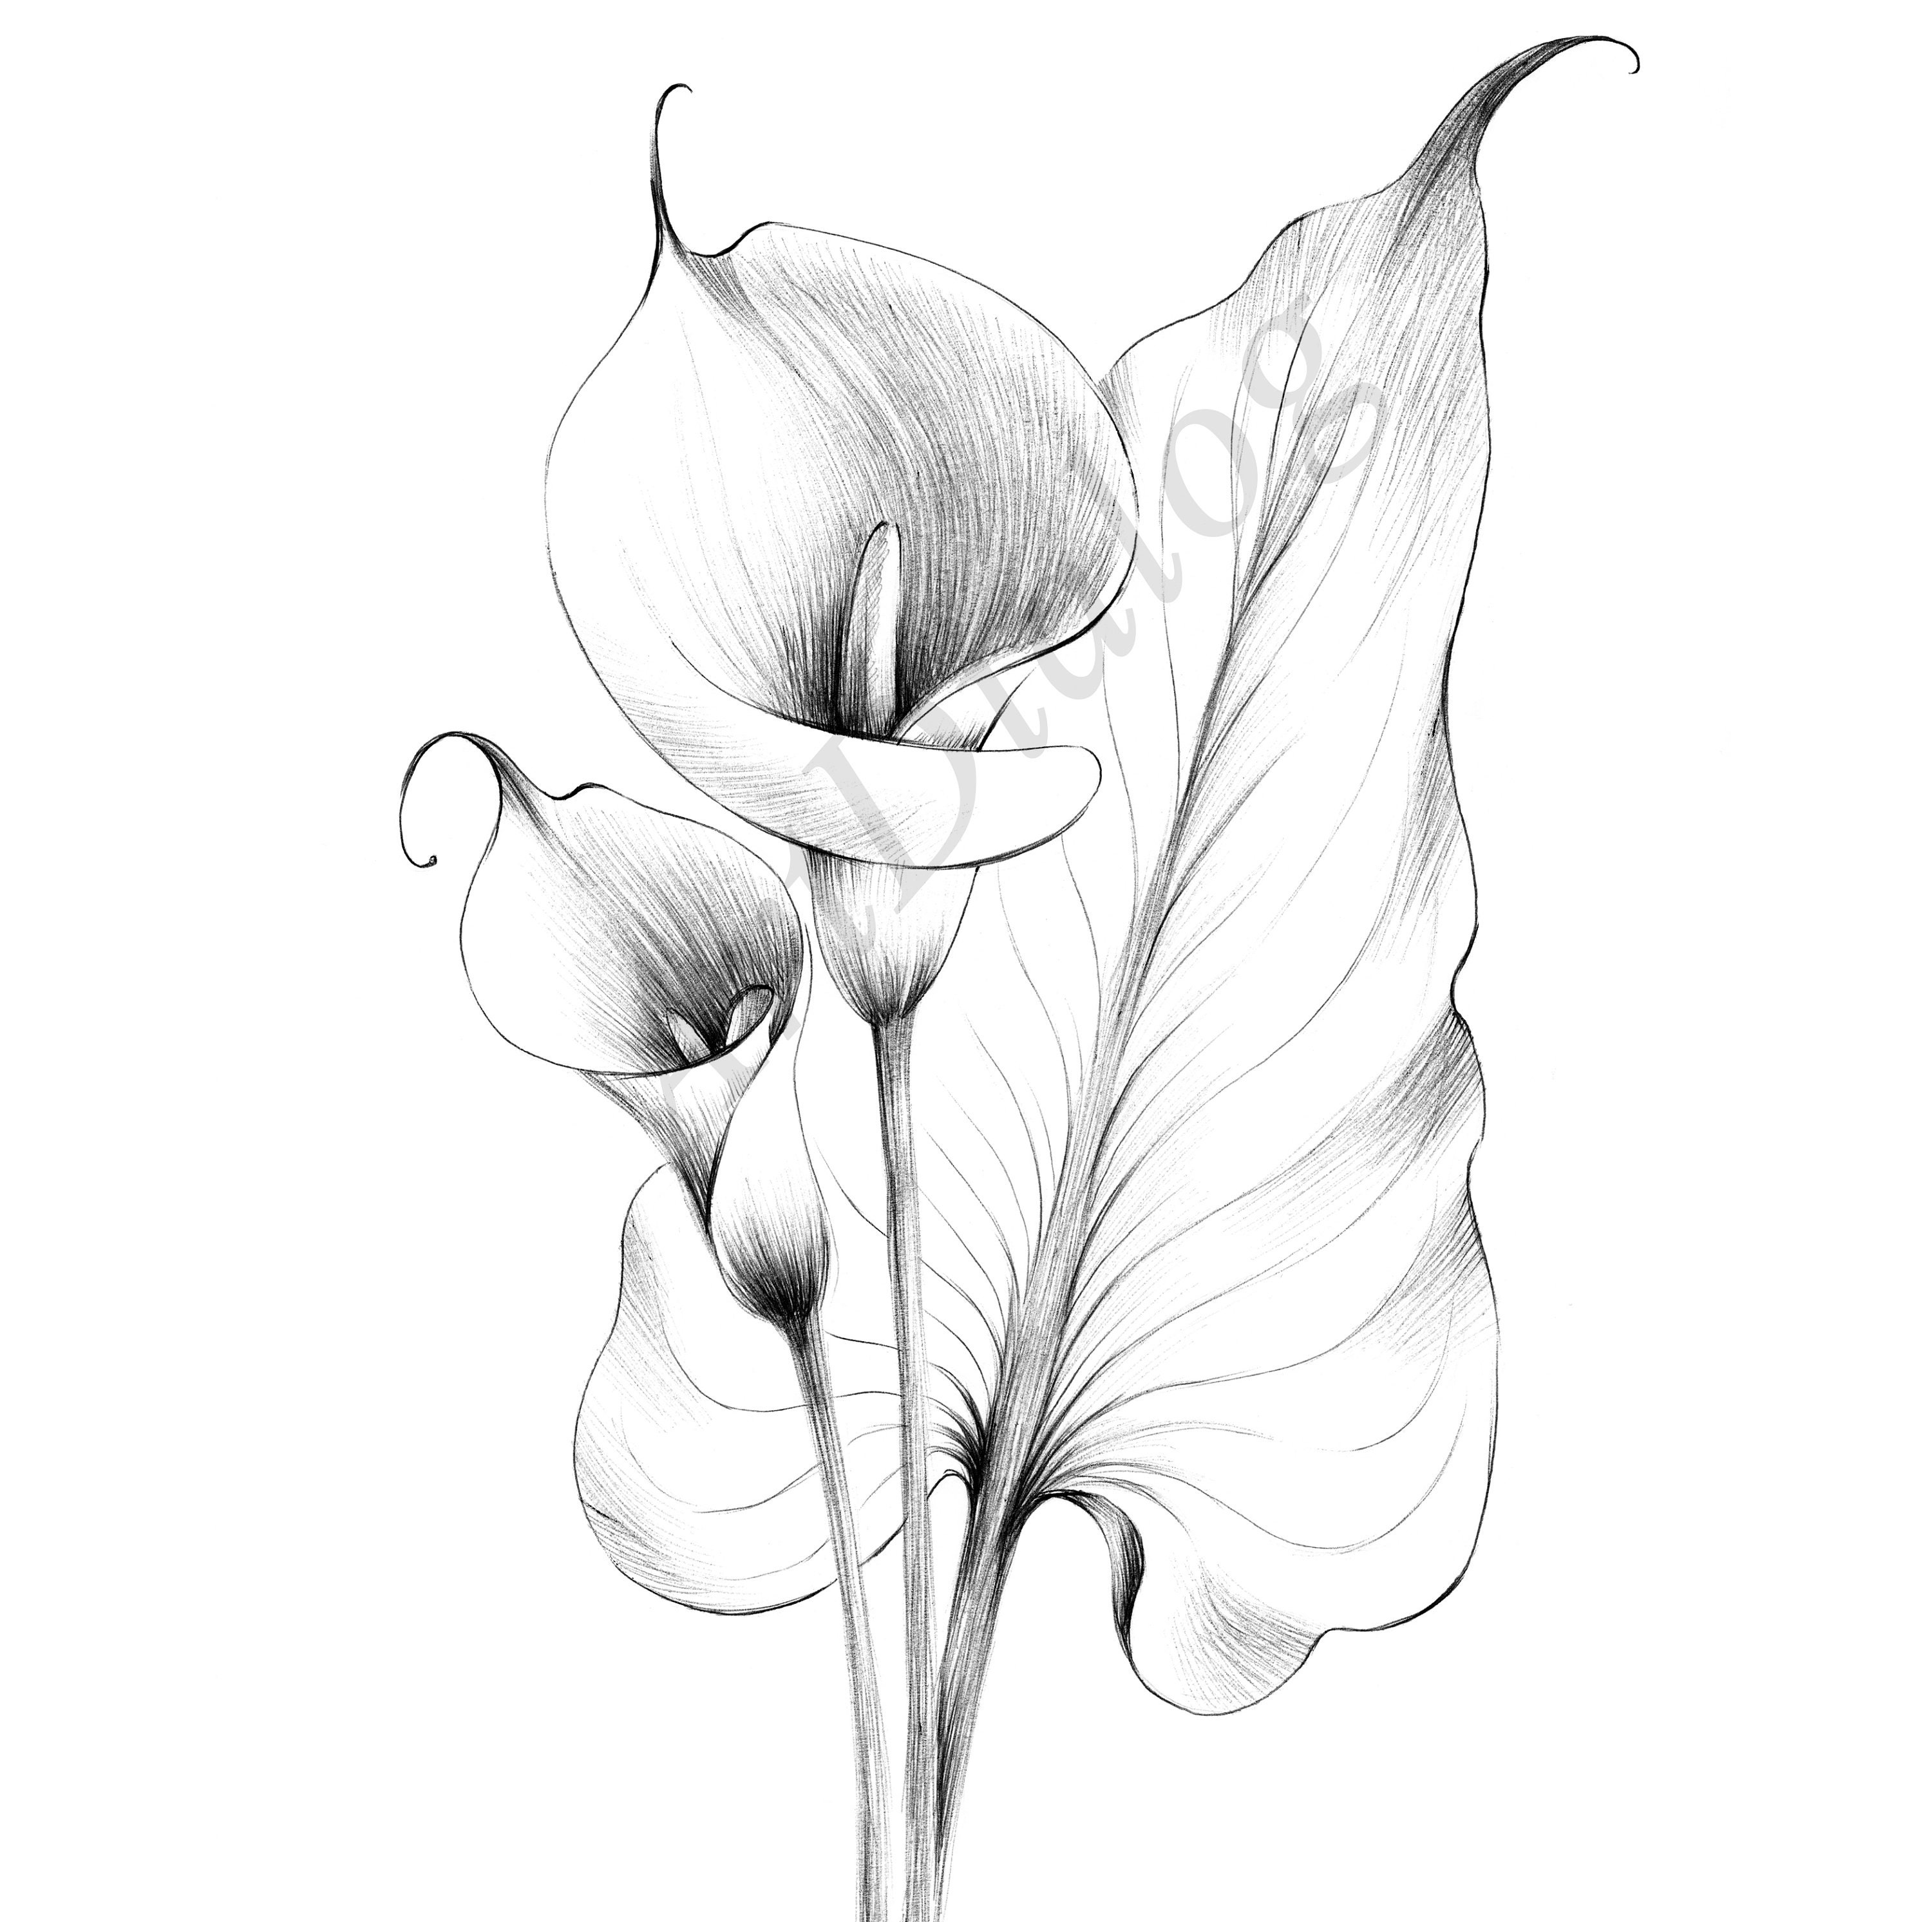 4426 Calla Lily Drawing Images Stock Photos  Vectors  Shutterstock